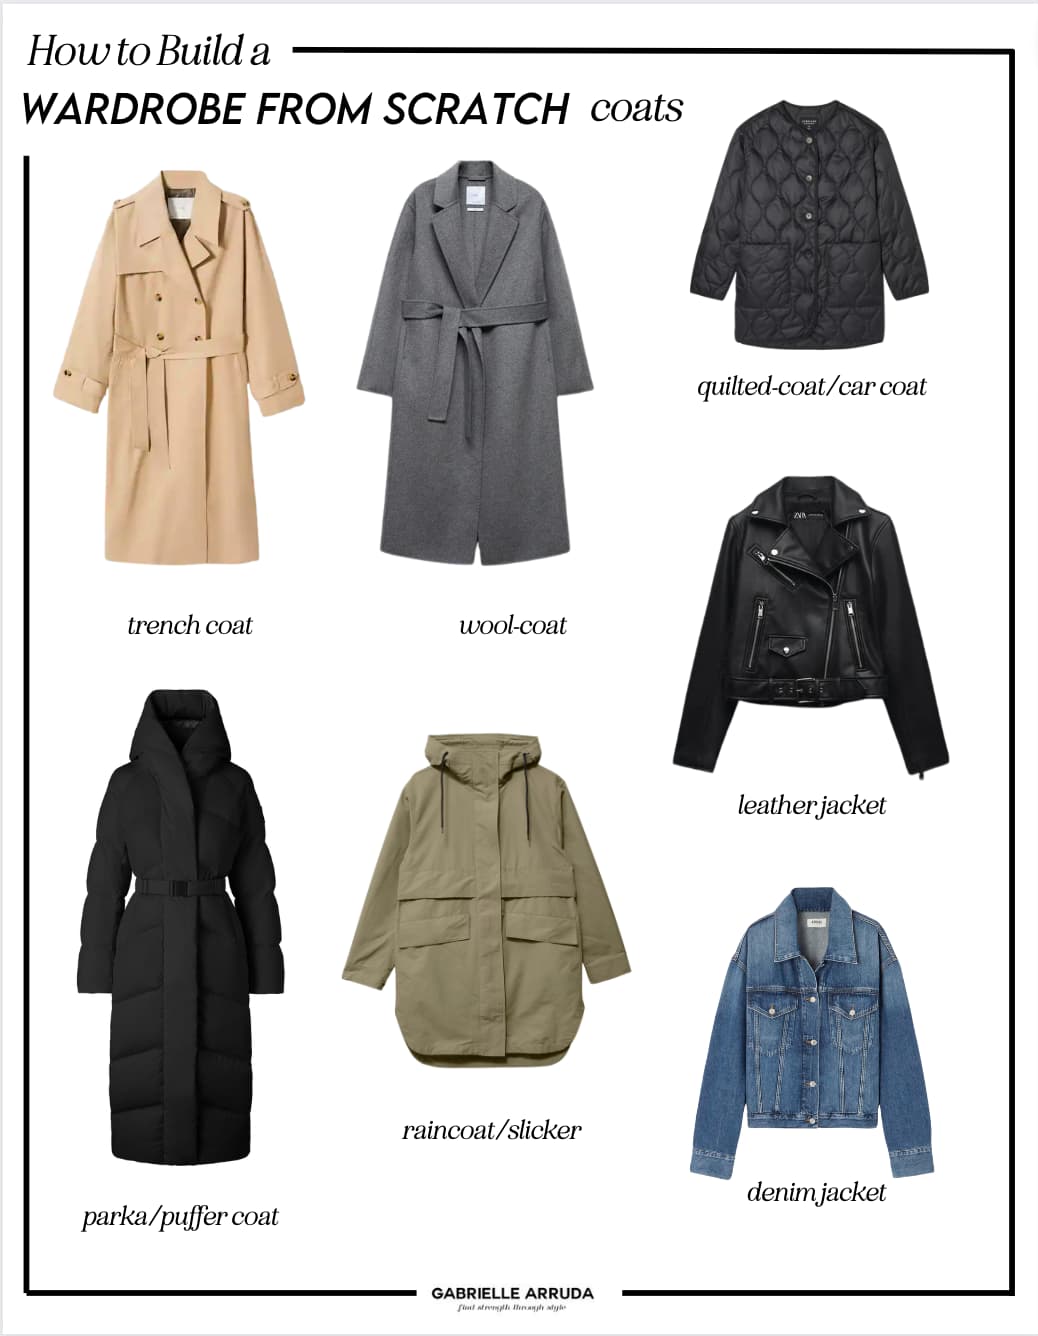 coats for building a wardrobe from scratch